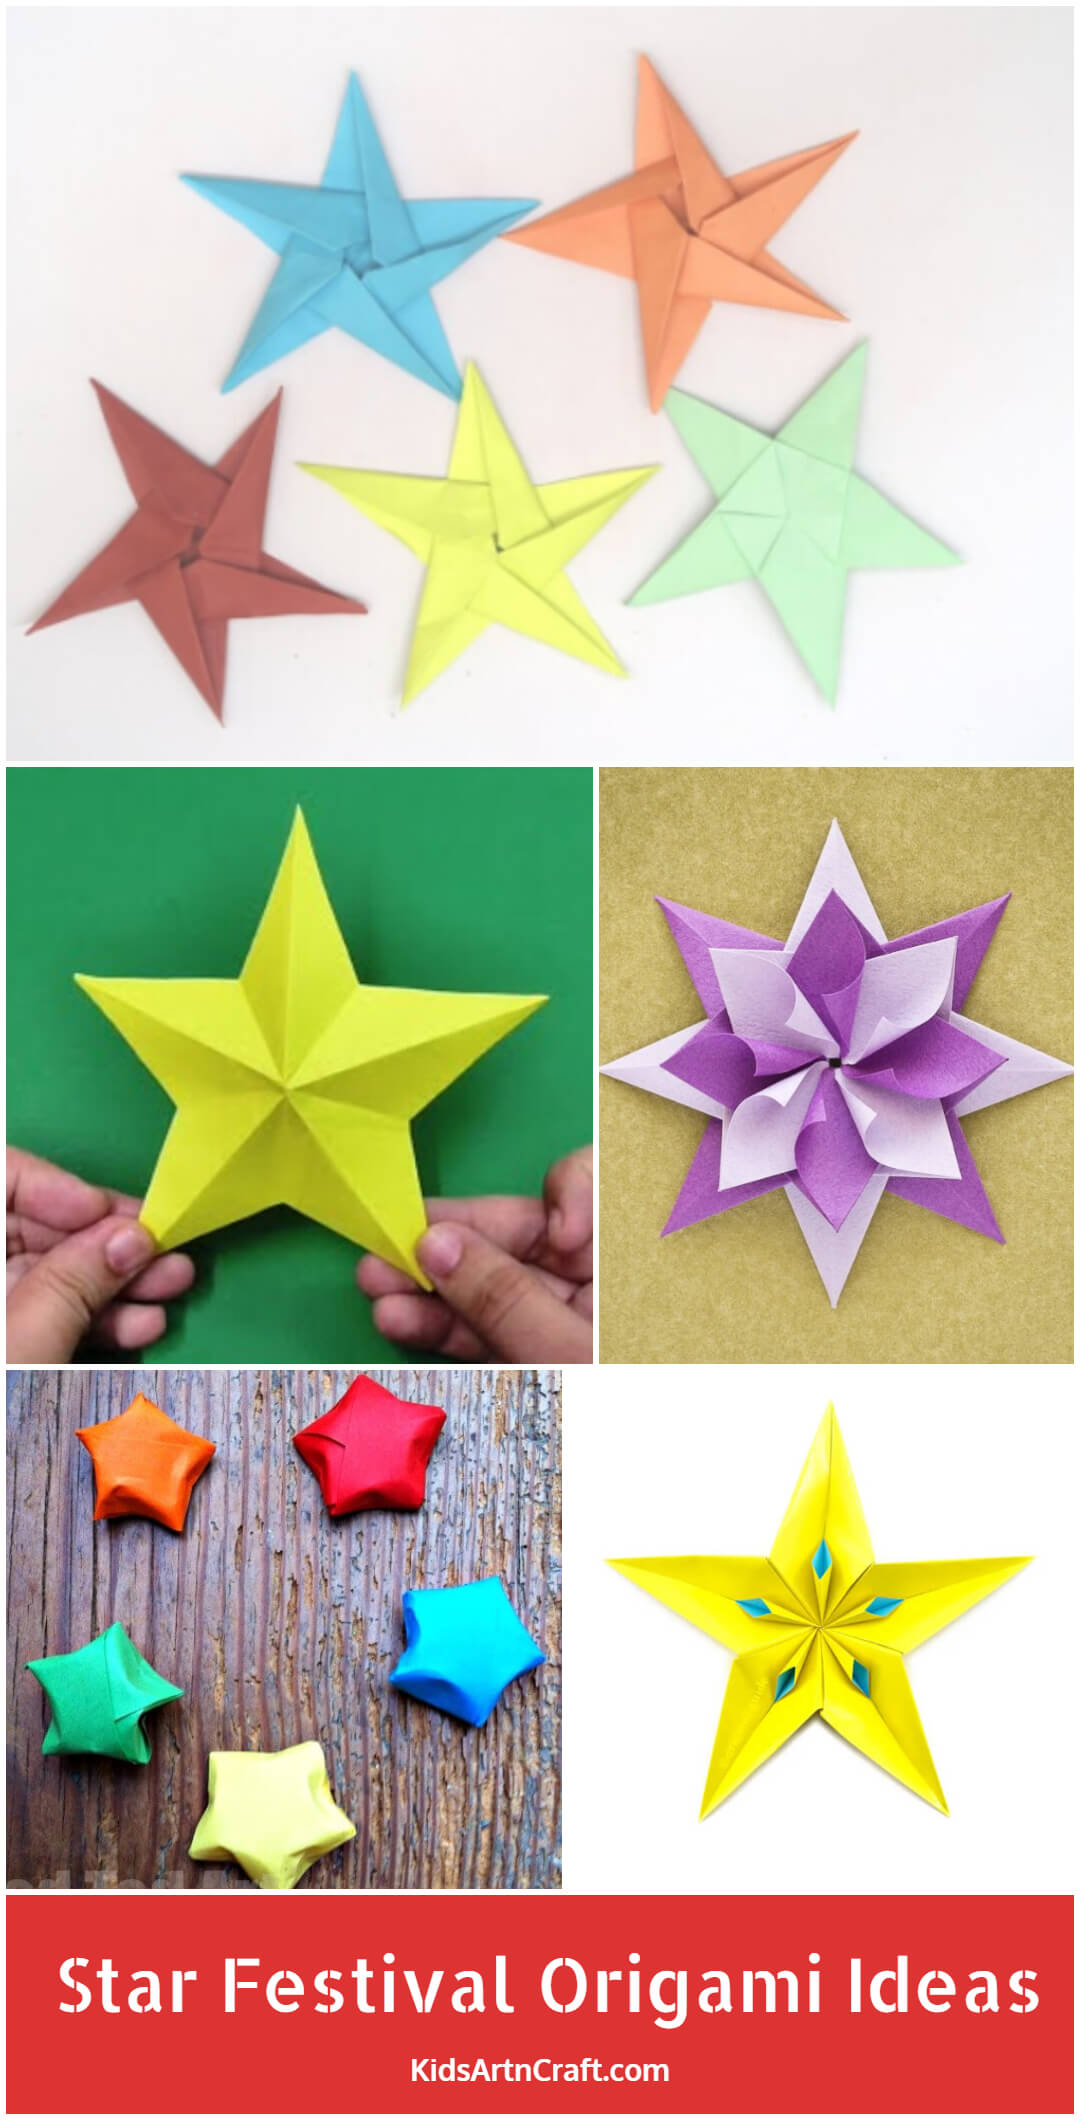 Star Festival Origami Ideas That Kids Can Make